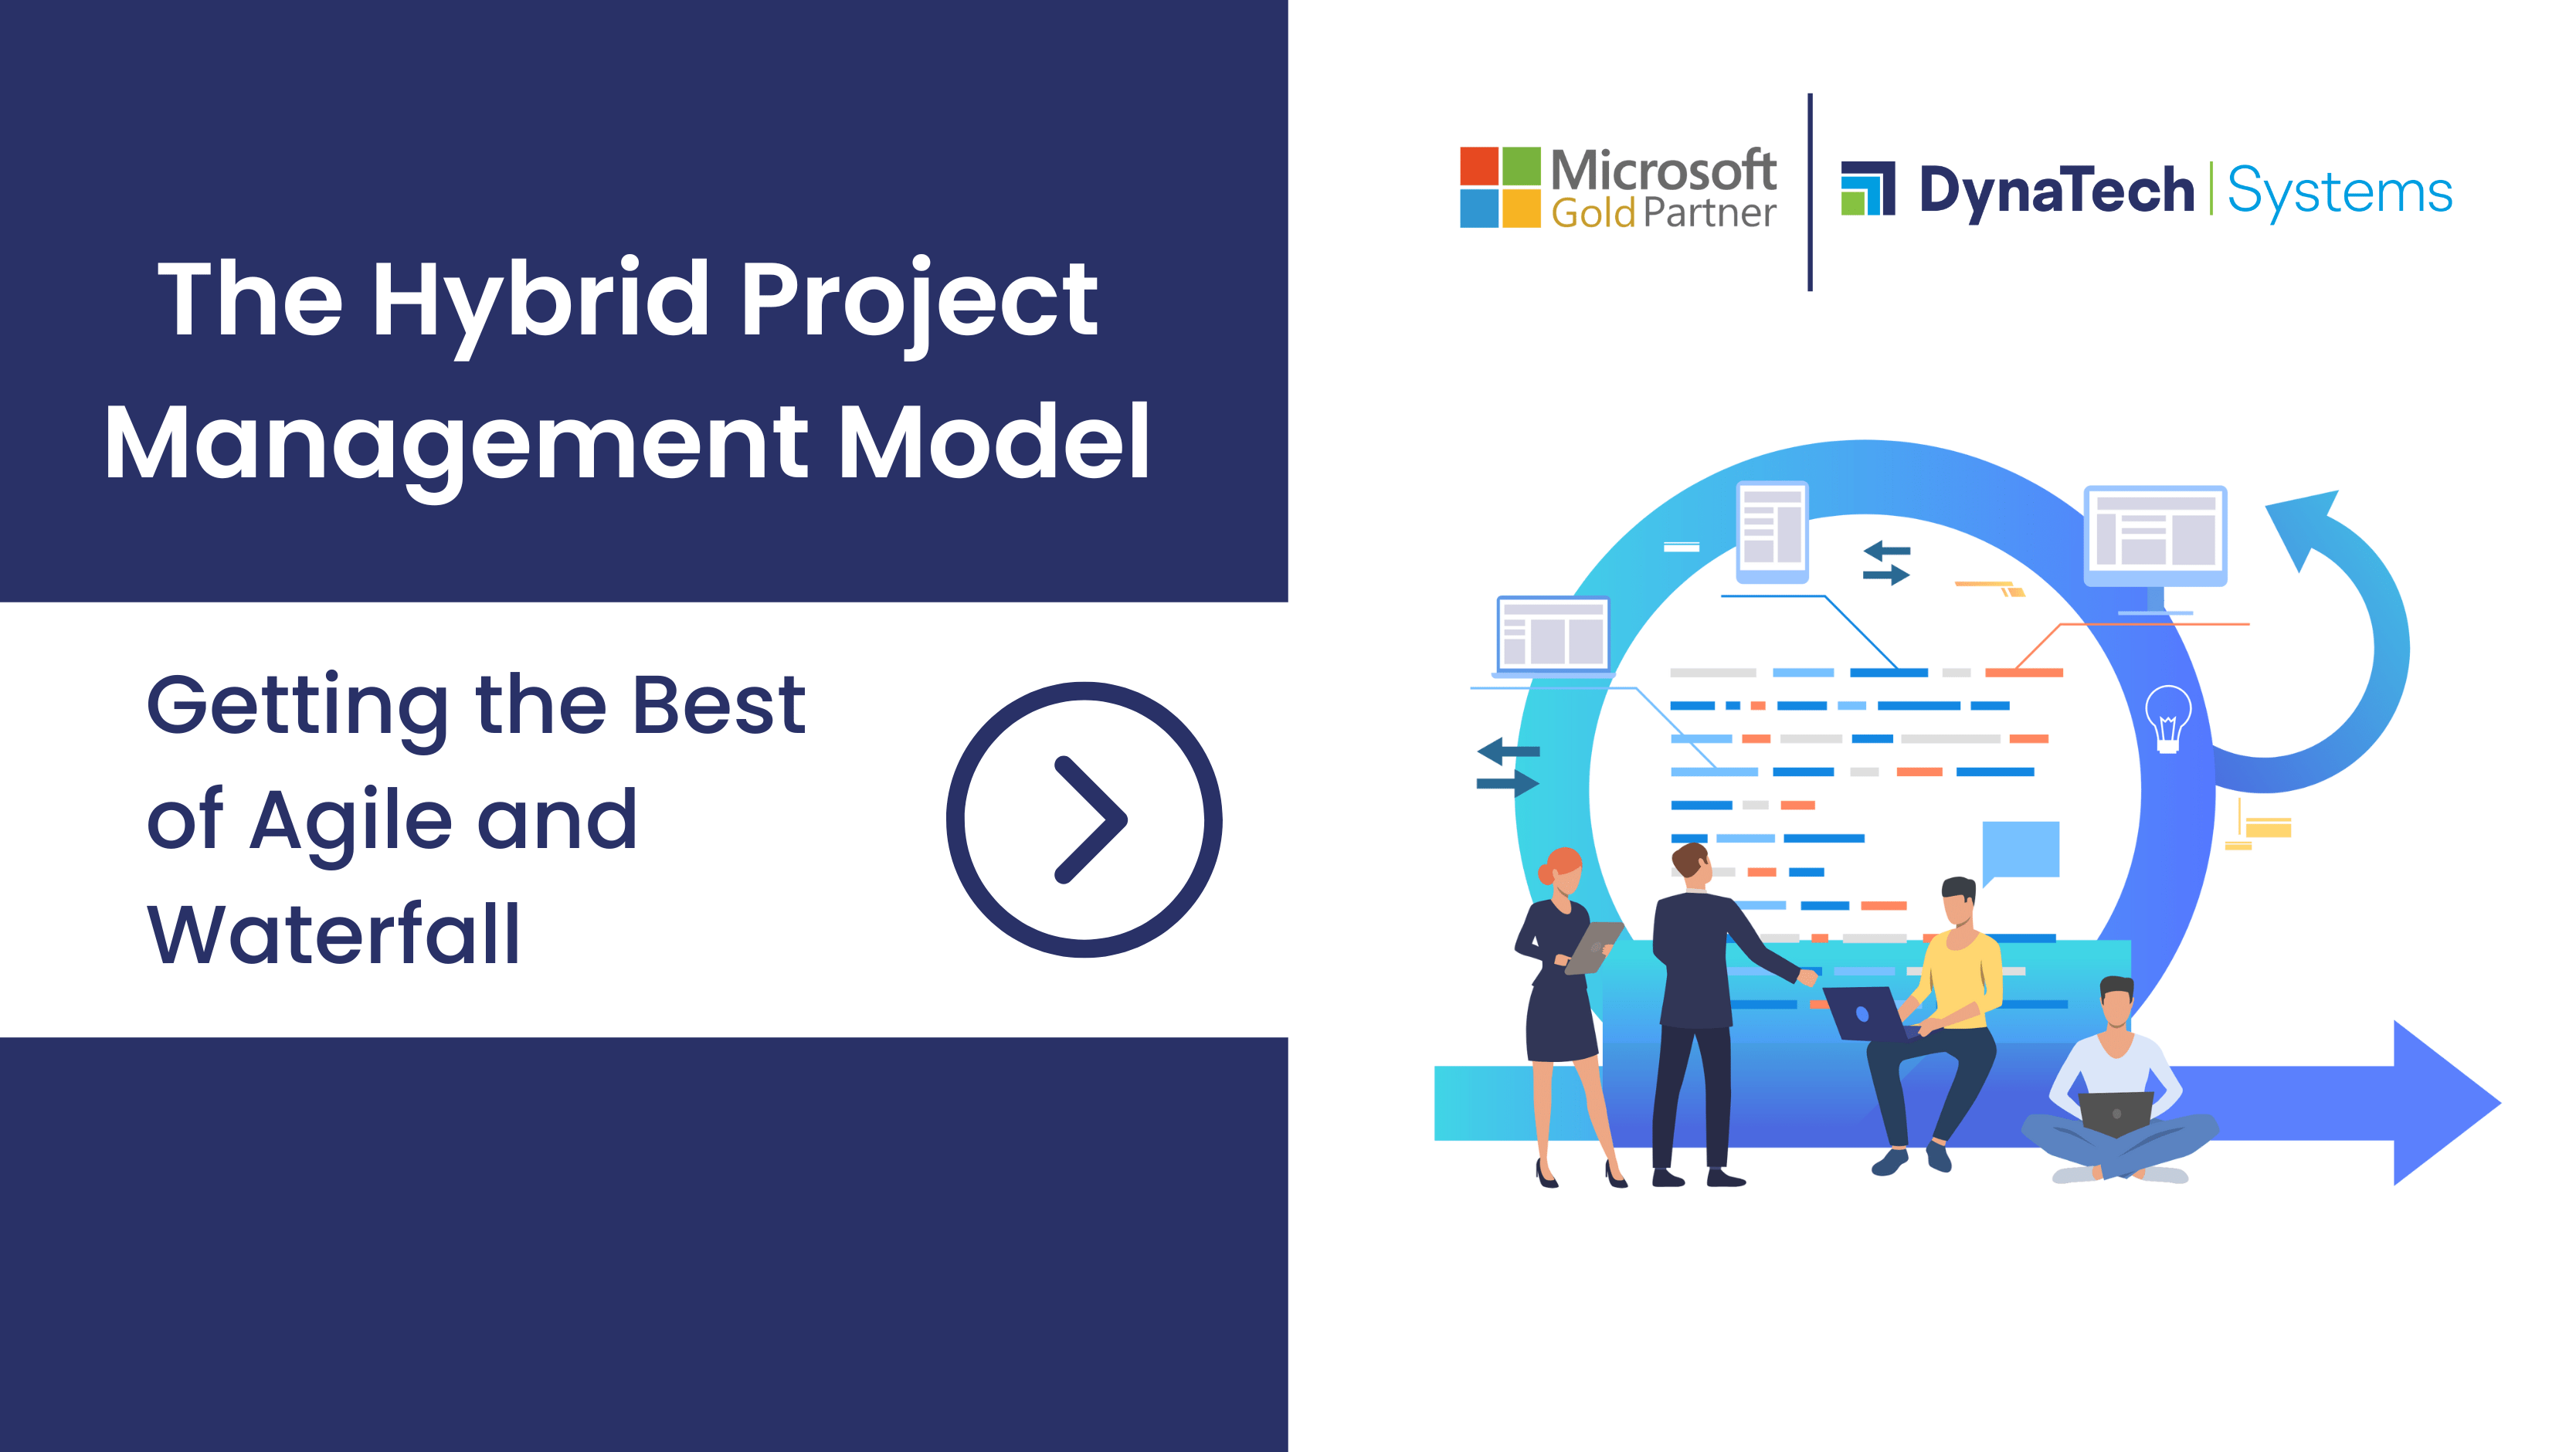 The Hybrid Project Management Model – Getting the Best of Agile and Waterfall